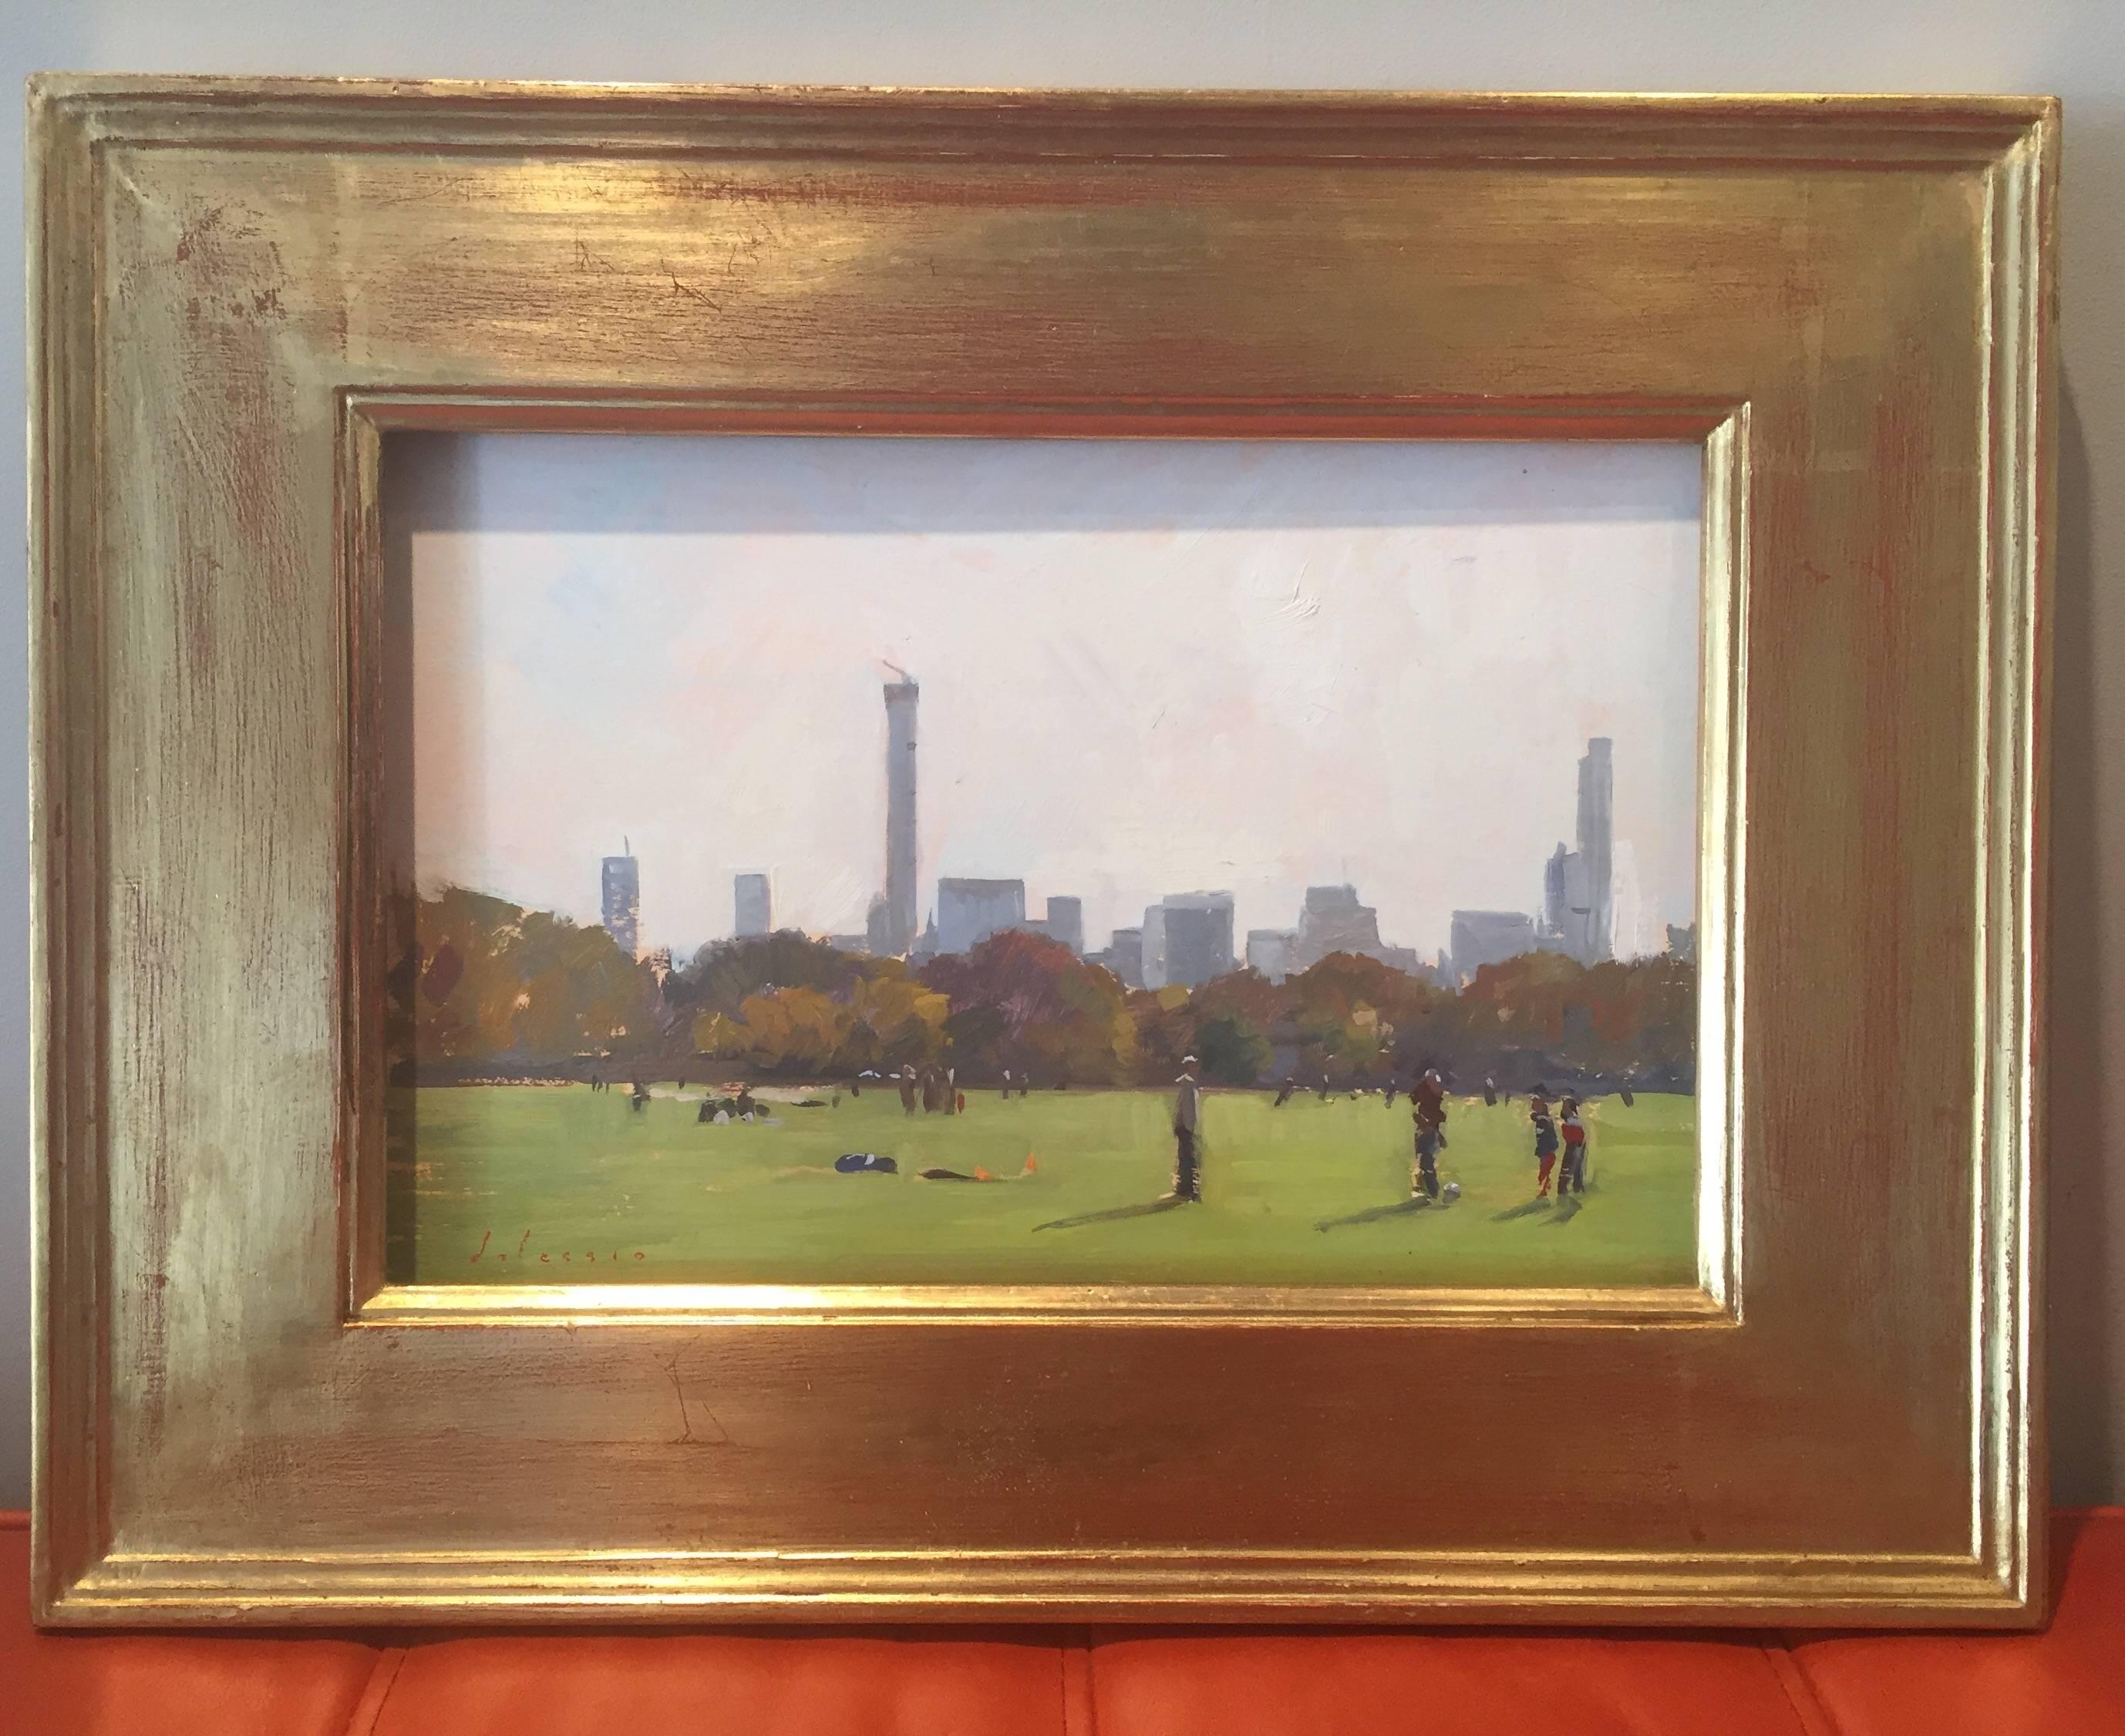 Soccer Players in Central Park - NYC skyline looking Downtown - en plein air - American Impressionist Painting by Marc Dalessio